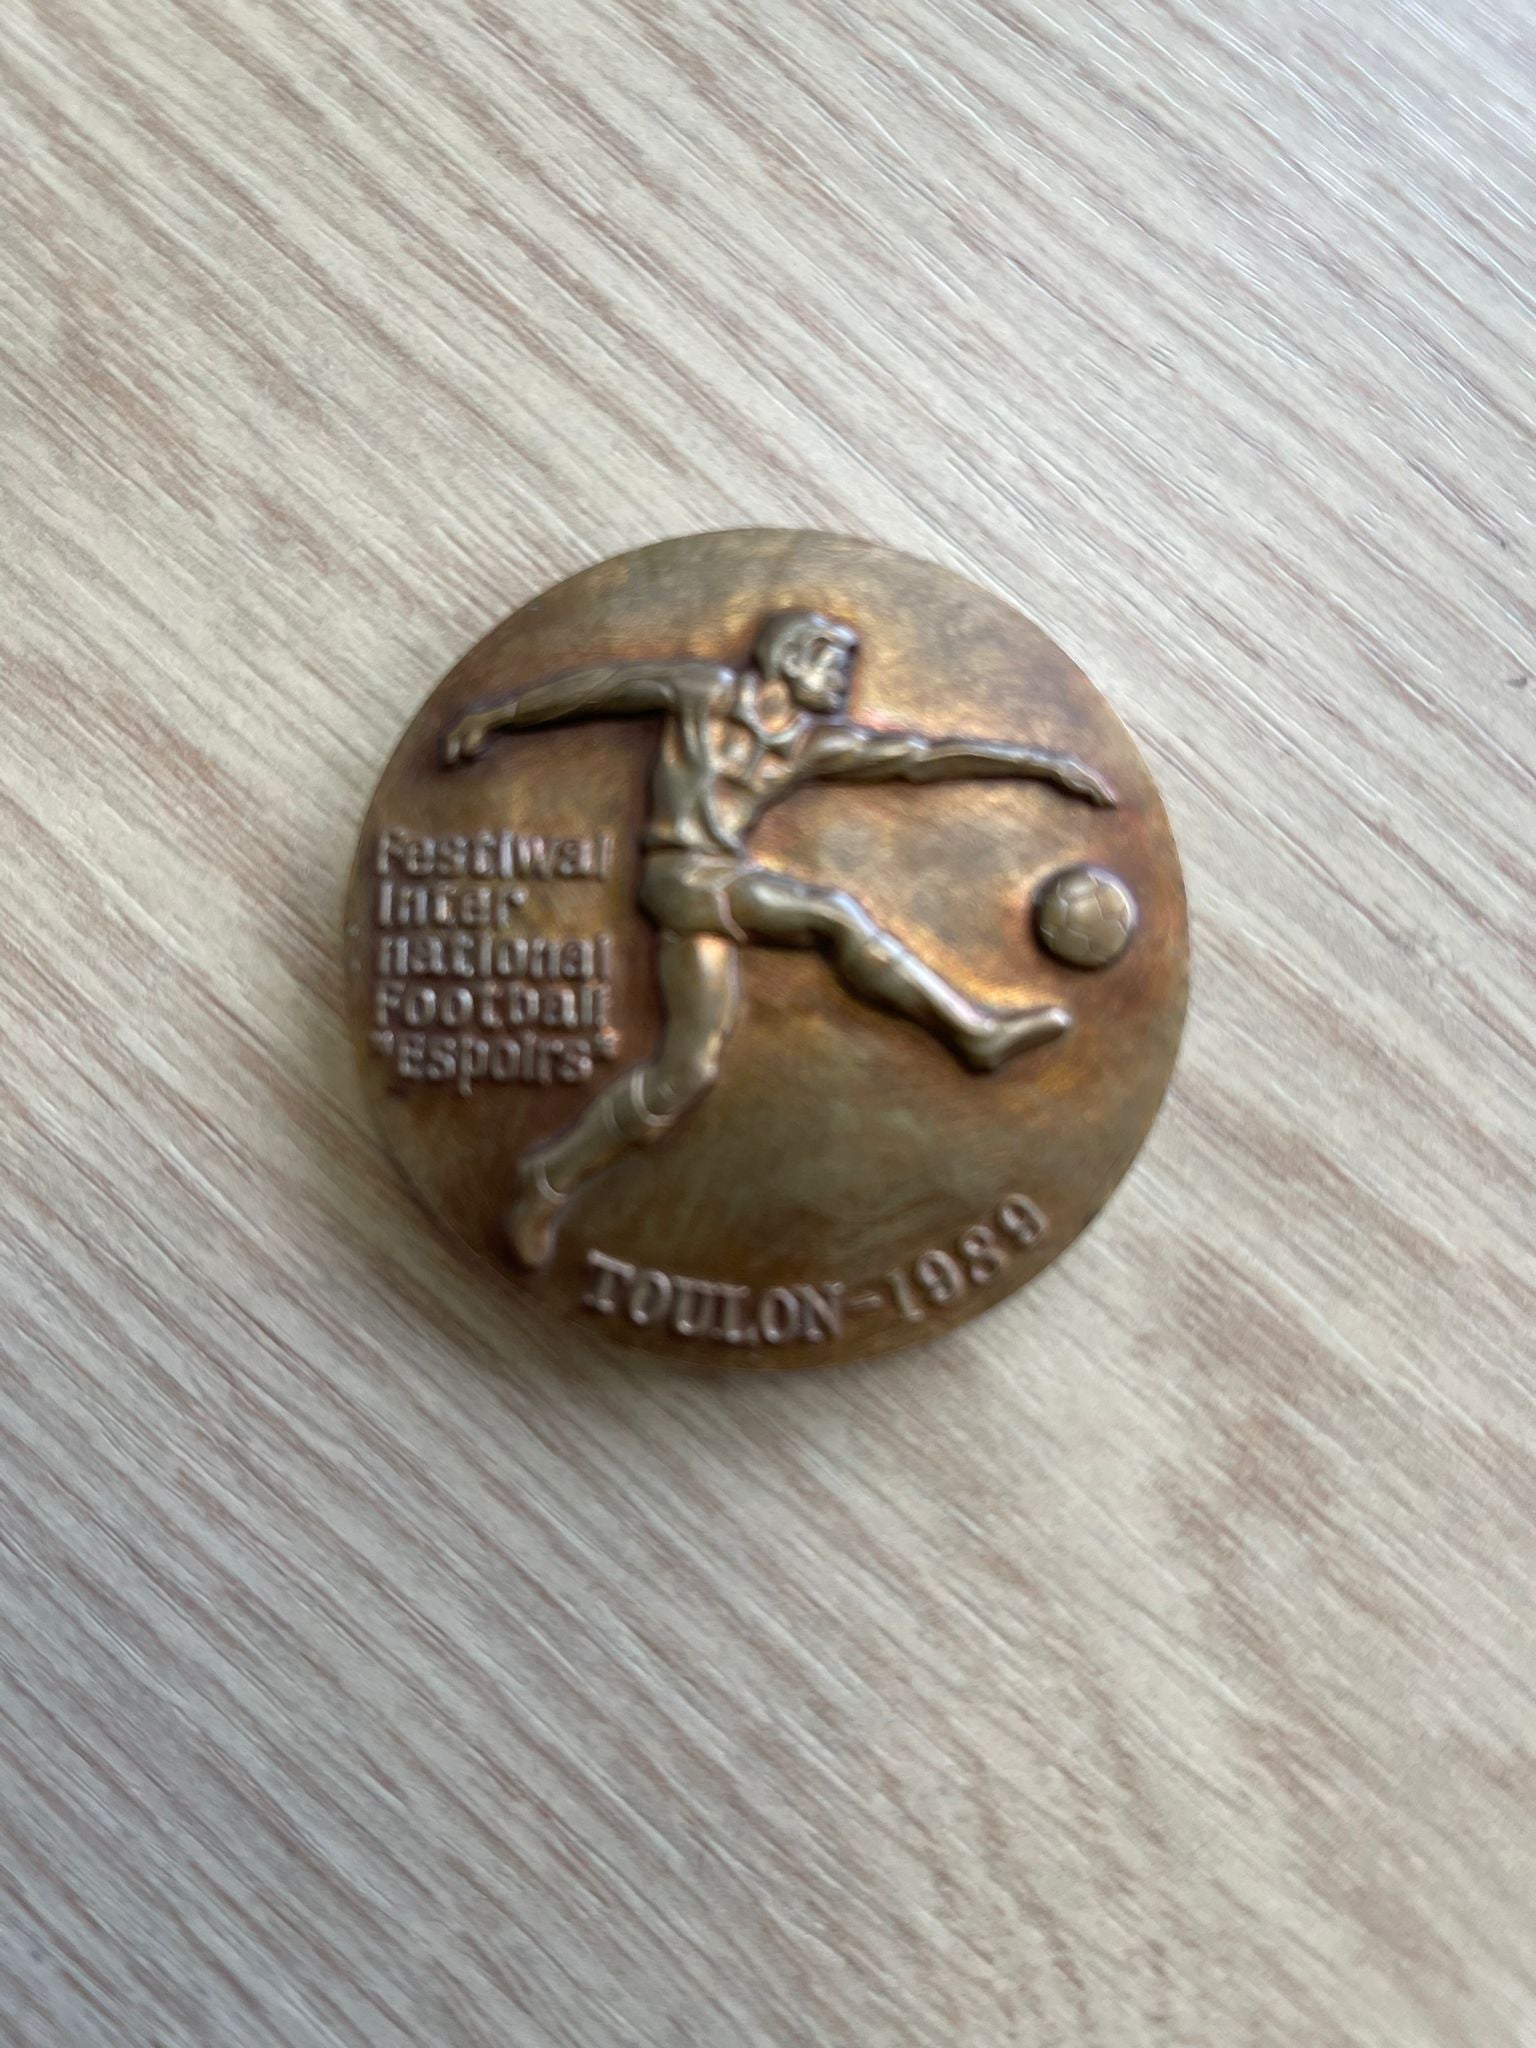 * REDUCED * Jeff Kenna Toulon Tournament Medal Awarded to him in 1989